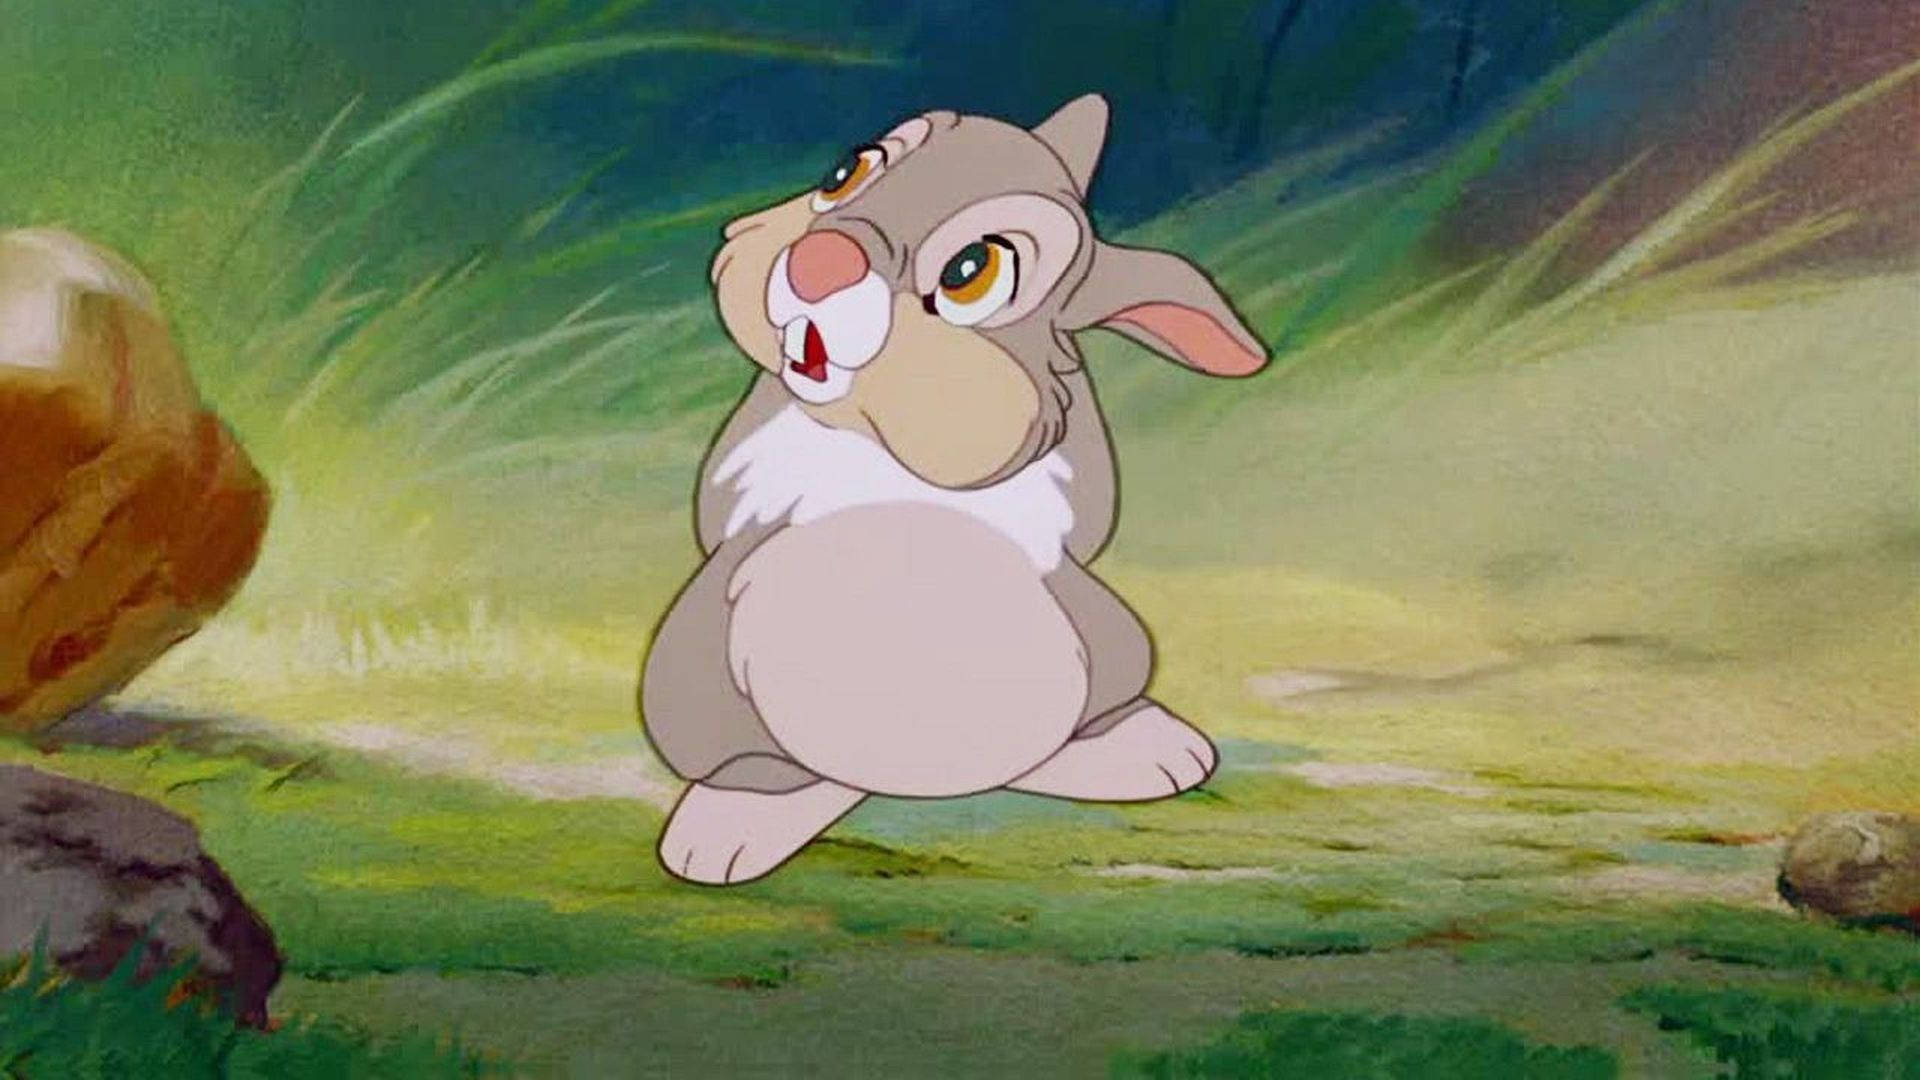 Floppy-eared Thumper With Bloated Tummy